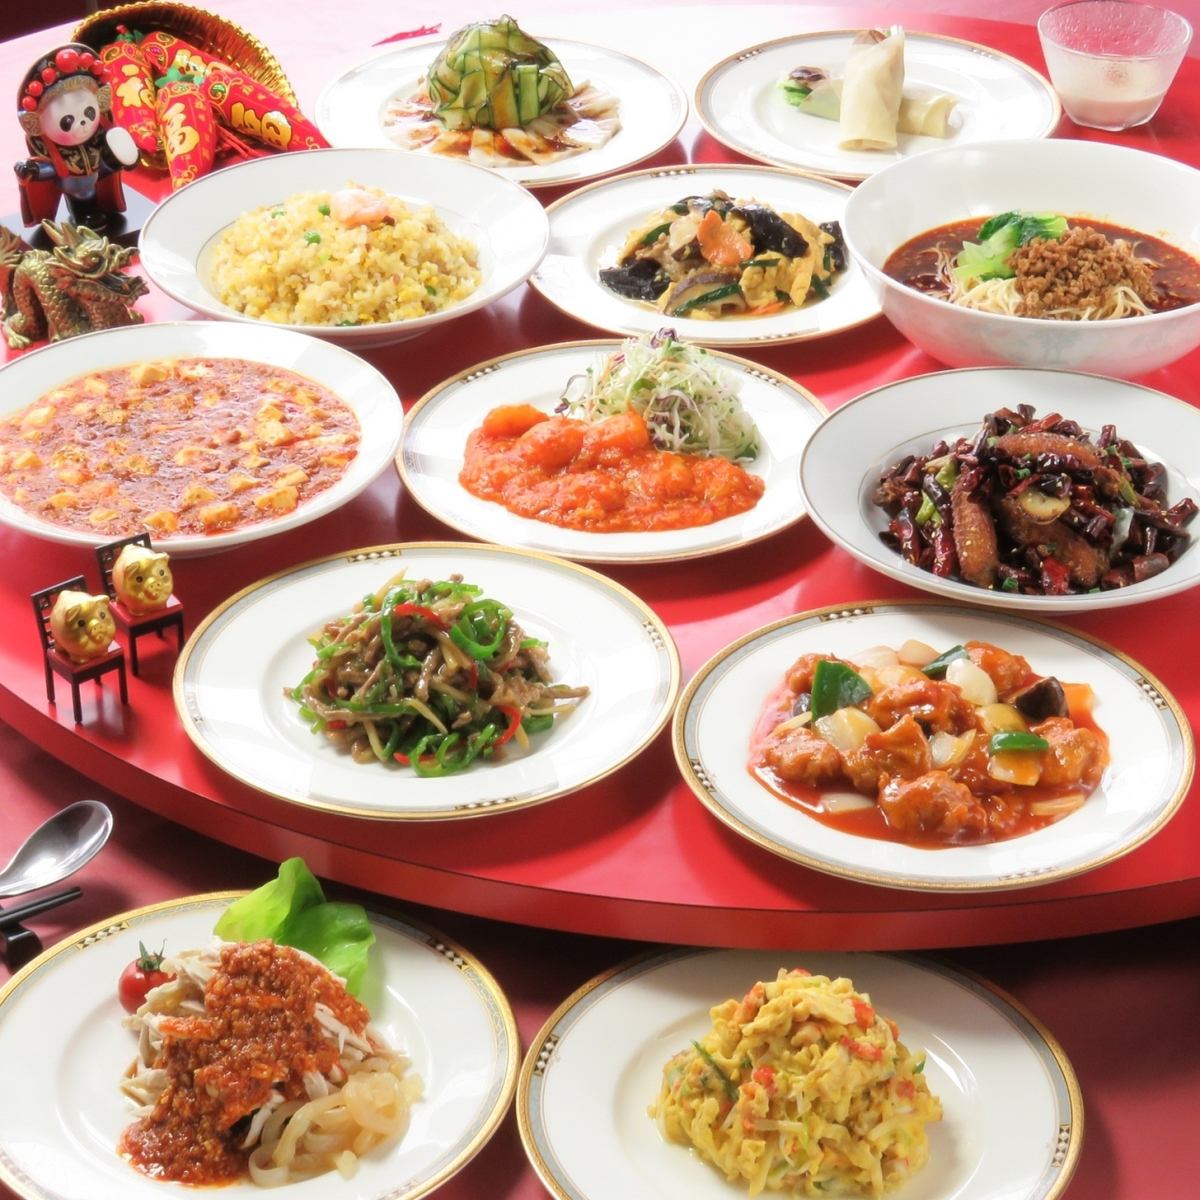 The pride of Sichuan Hanten! We have prepared a special plan for the finest Chinese food!